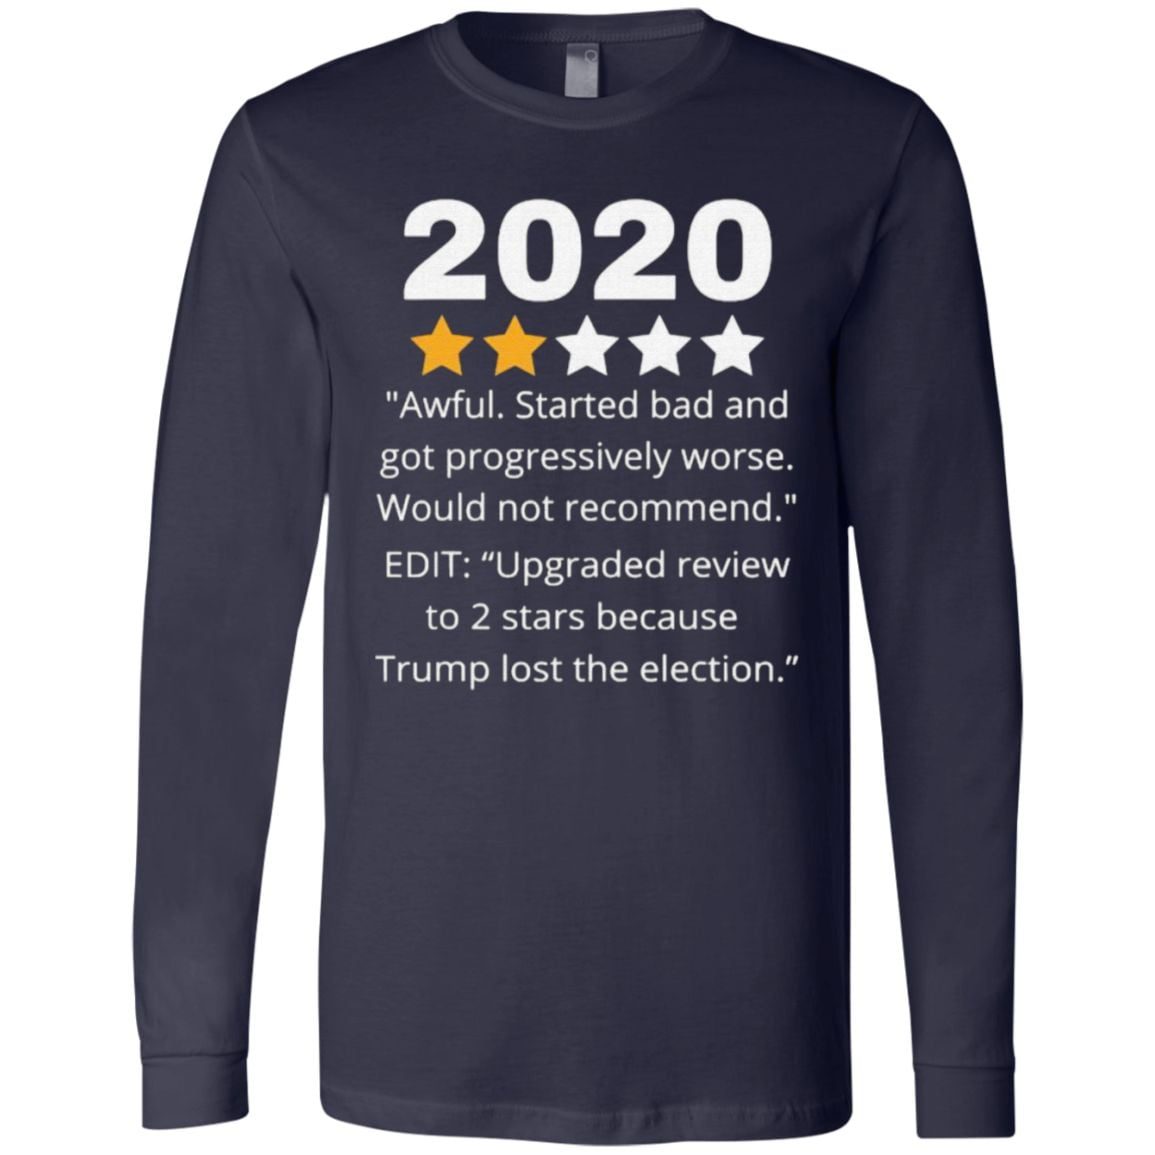 2020 Review Two Stars Awful Bad Rating Would Not Recommend T Shirt